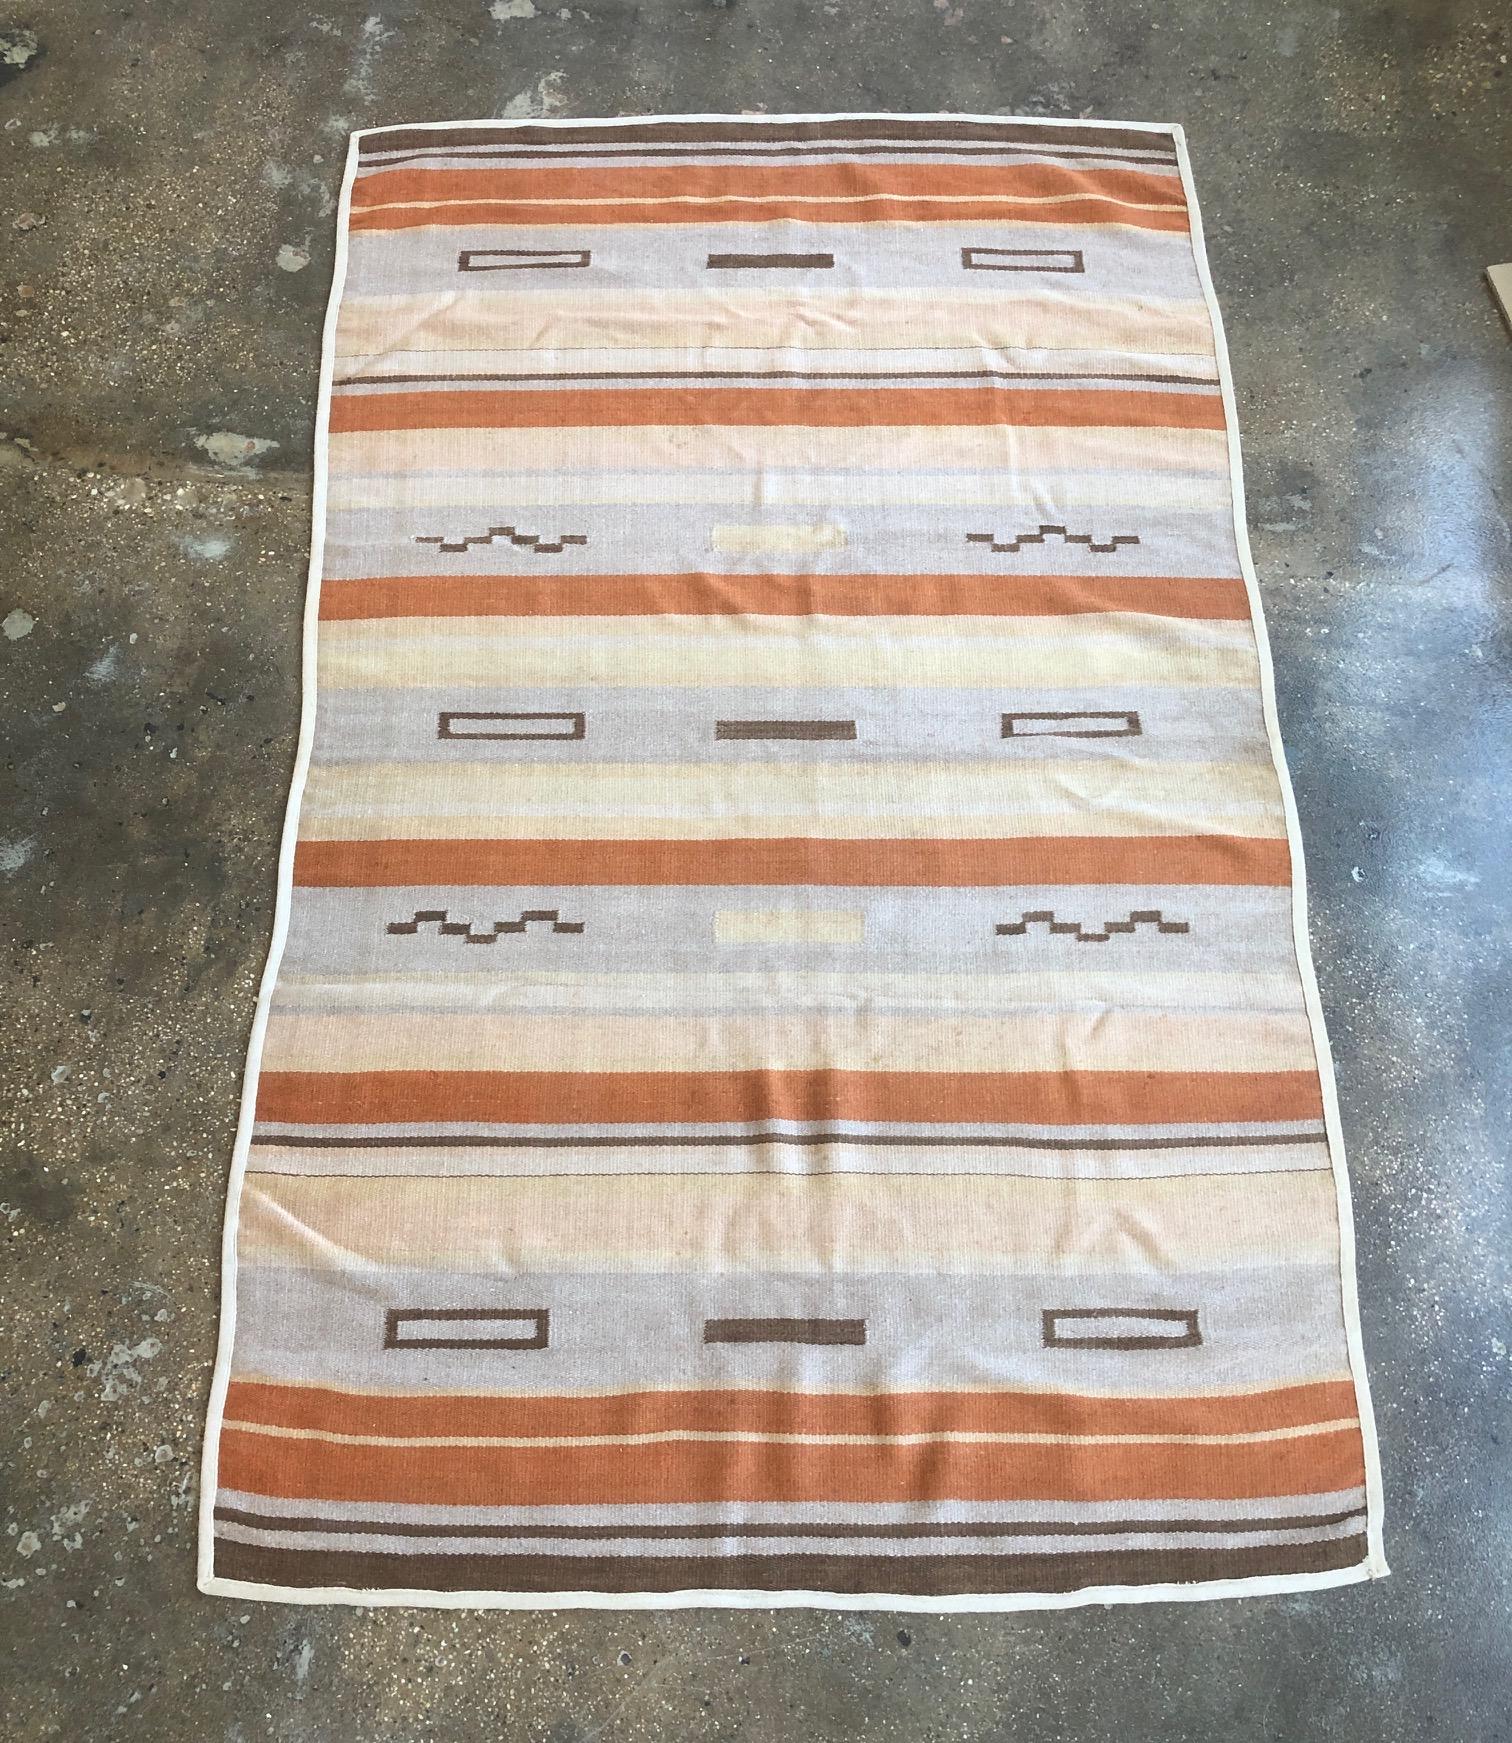 Flat wave rug made in Finland. Circa 1930th.
Wear consistent with age and use. Some stains, trace of repair.
Dimensions 9'10